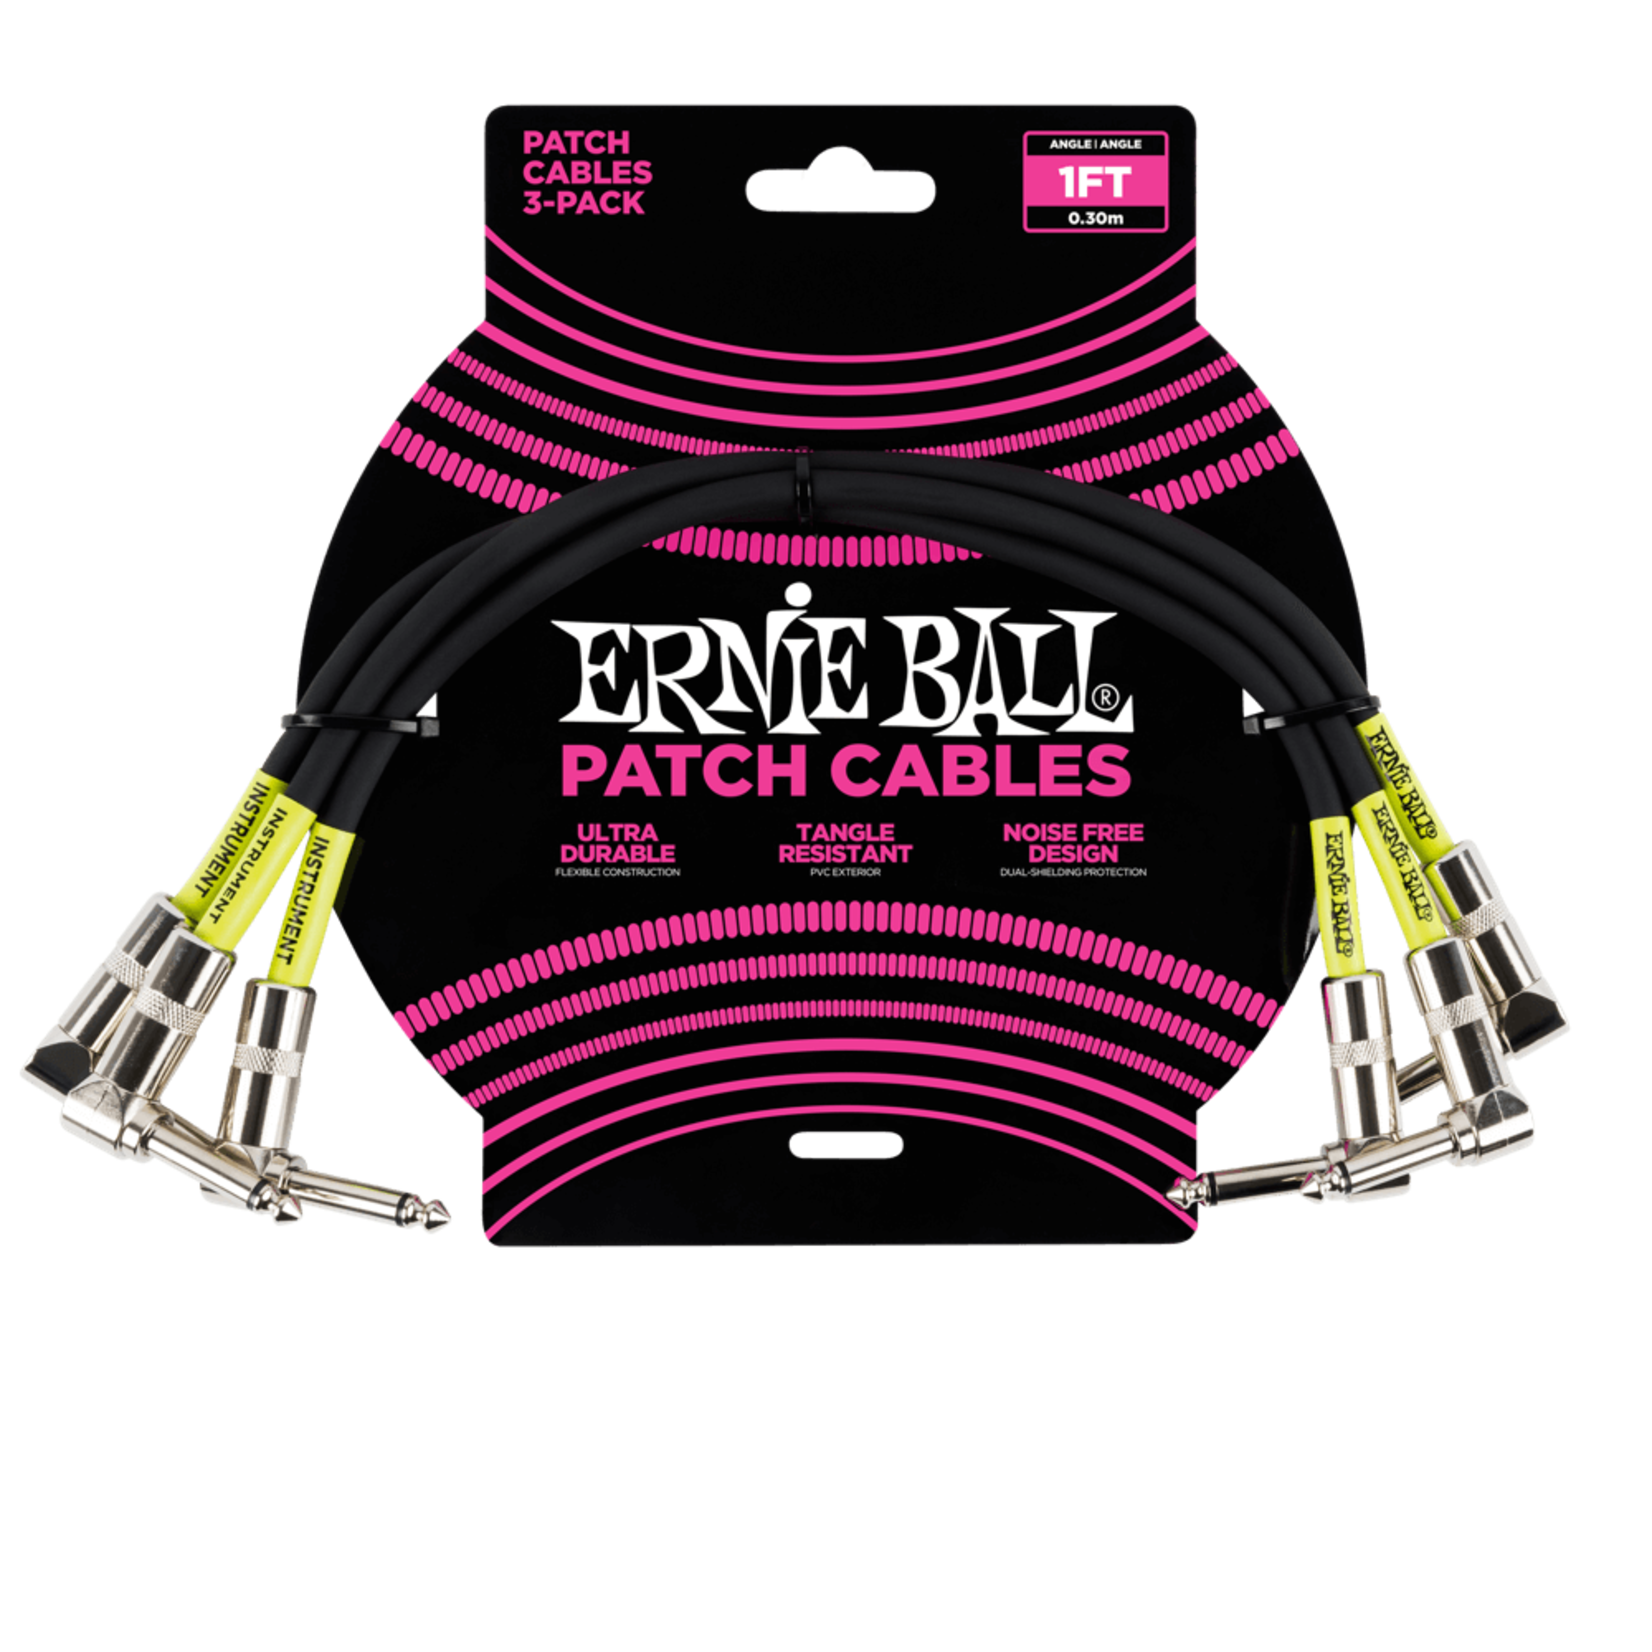 Ernie Ball Classic Patch Cable Angle/Angle 1ft - Black - 3 Pack